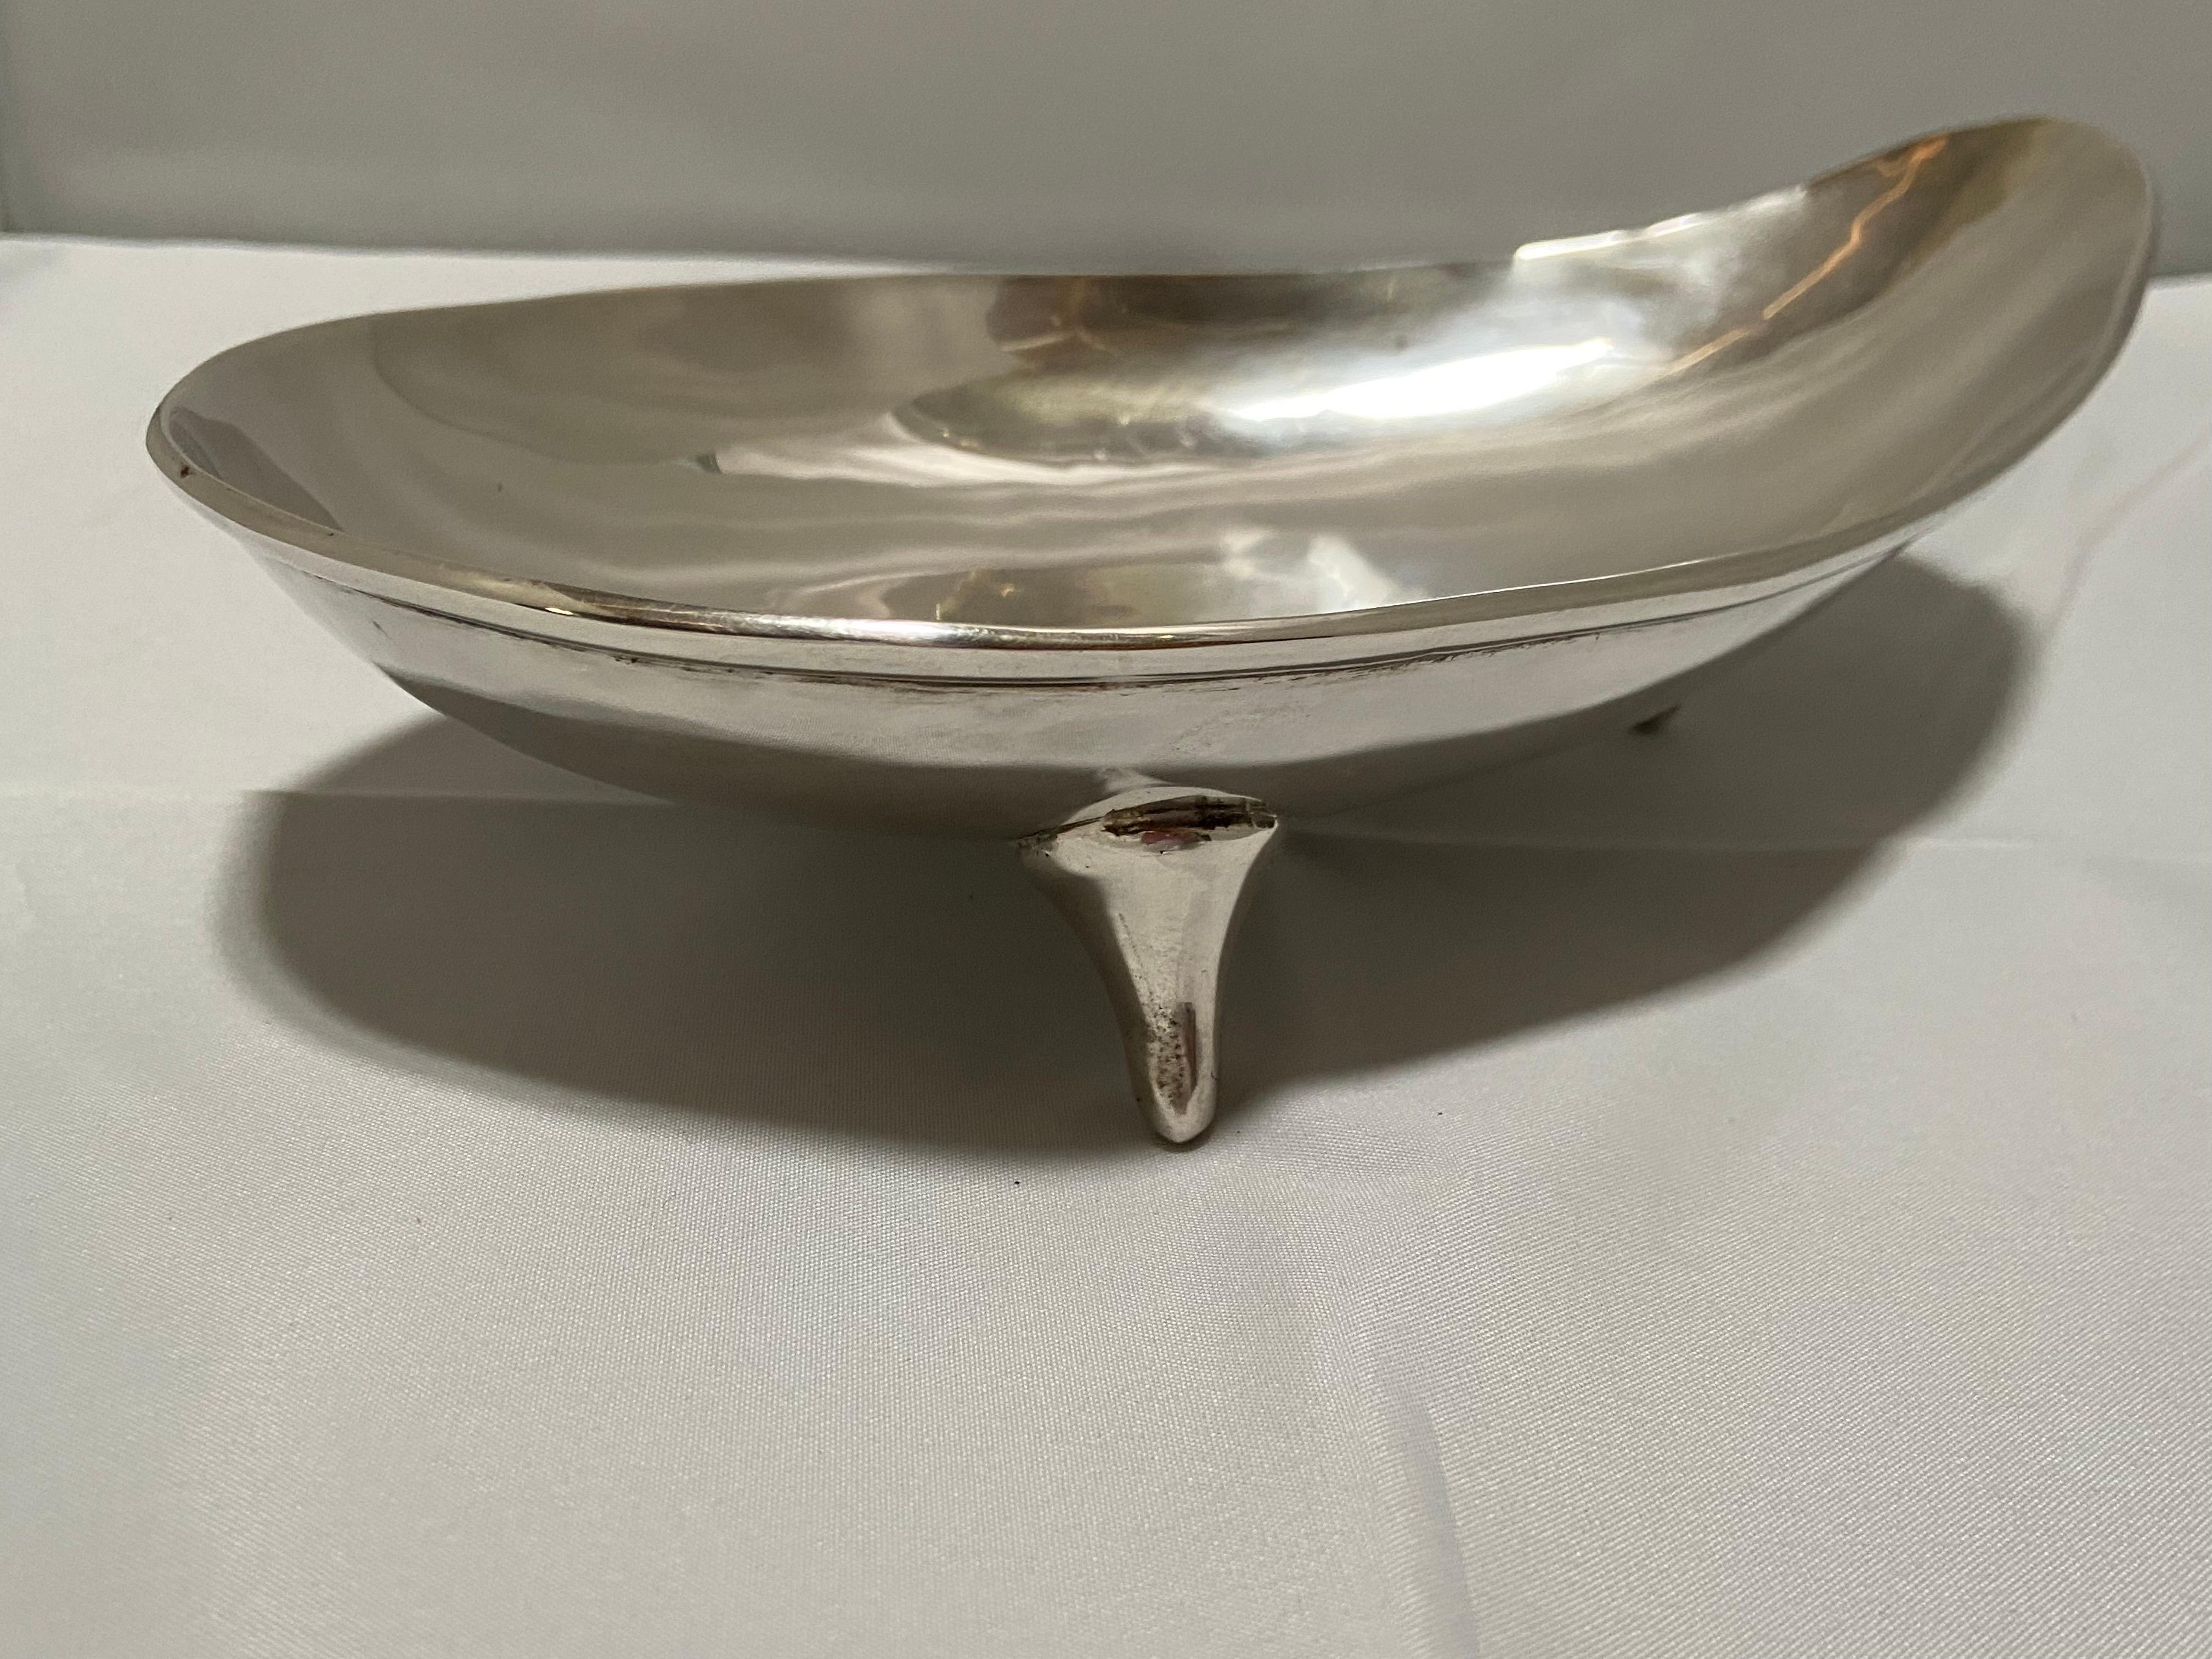 A vintage, Mid-Century Modern Mexican Sterling Silver three footed dish or bowl by the maker, C. Zurita. With a nod to the eponymous design firm of Georg Jensen, this Modernist style dish has flowing lines and a chic design. Marked on the bottom.